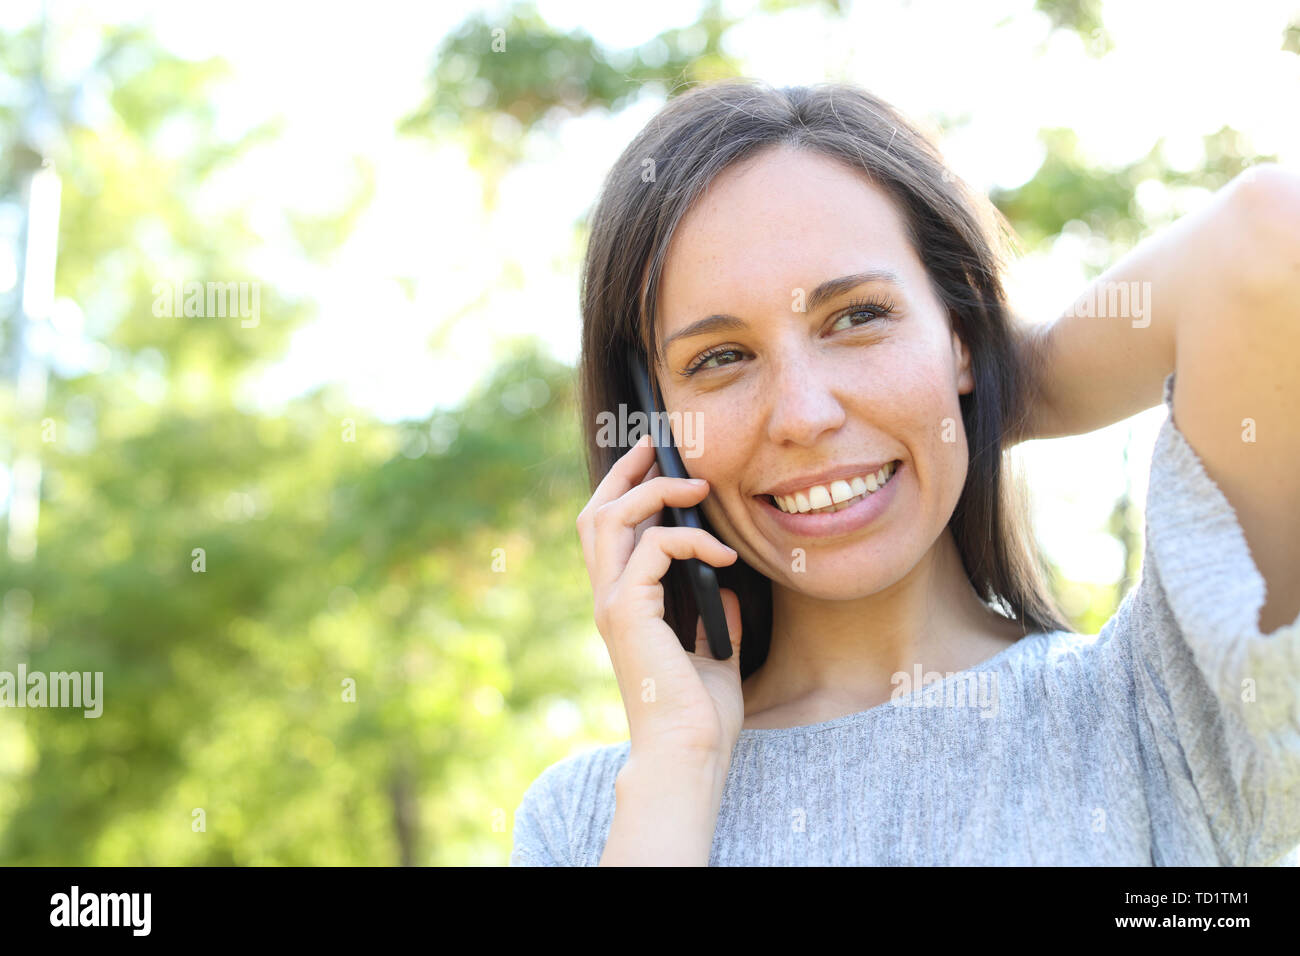 Happy woman calls on smart phone standing outdoors in a park Stock Photo